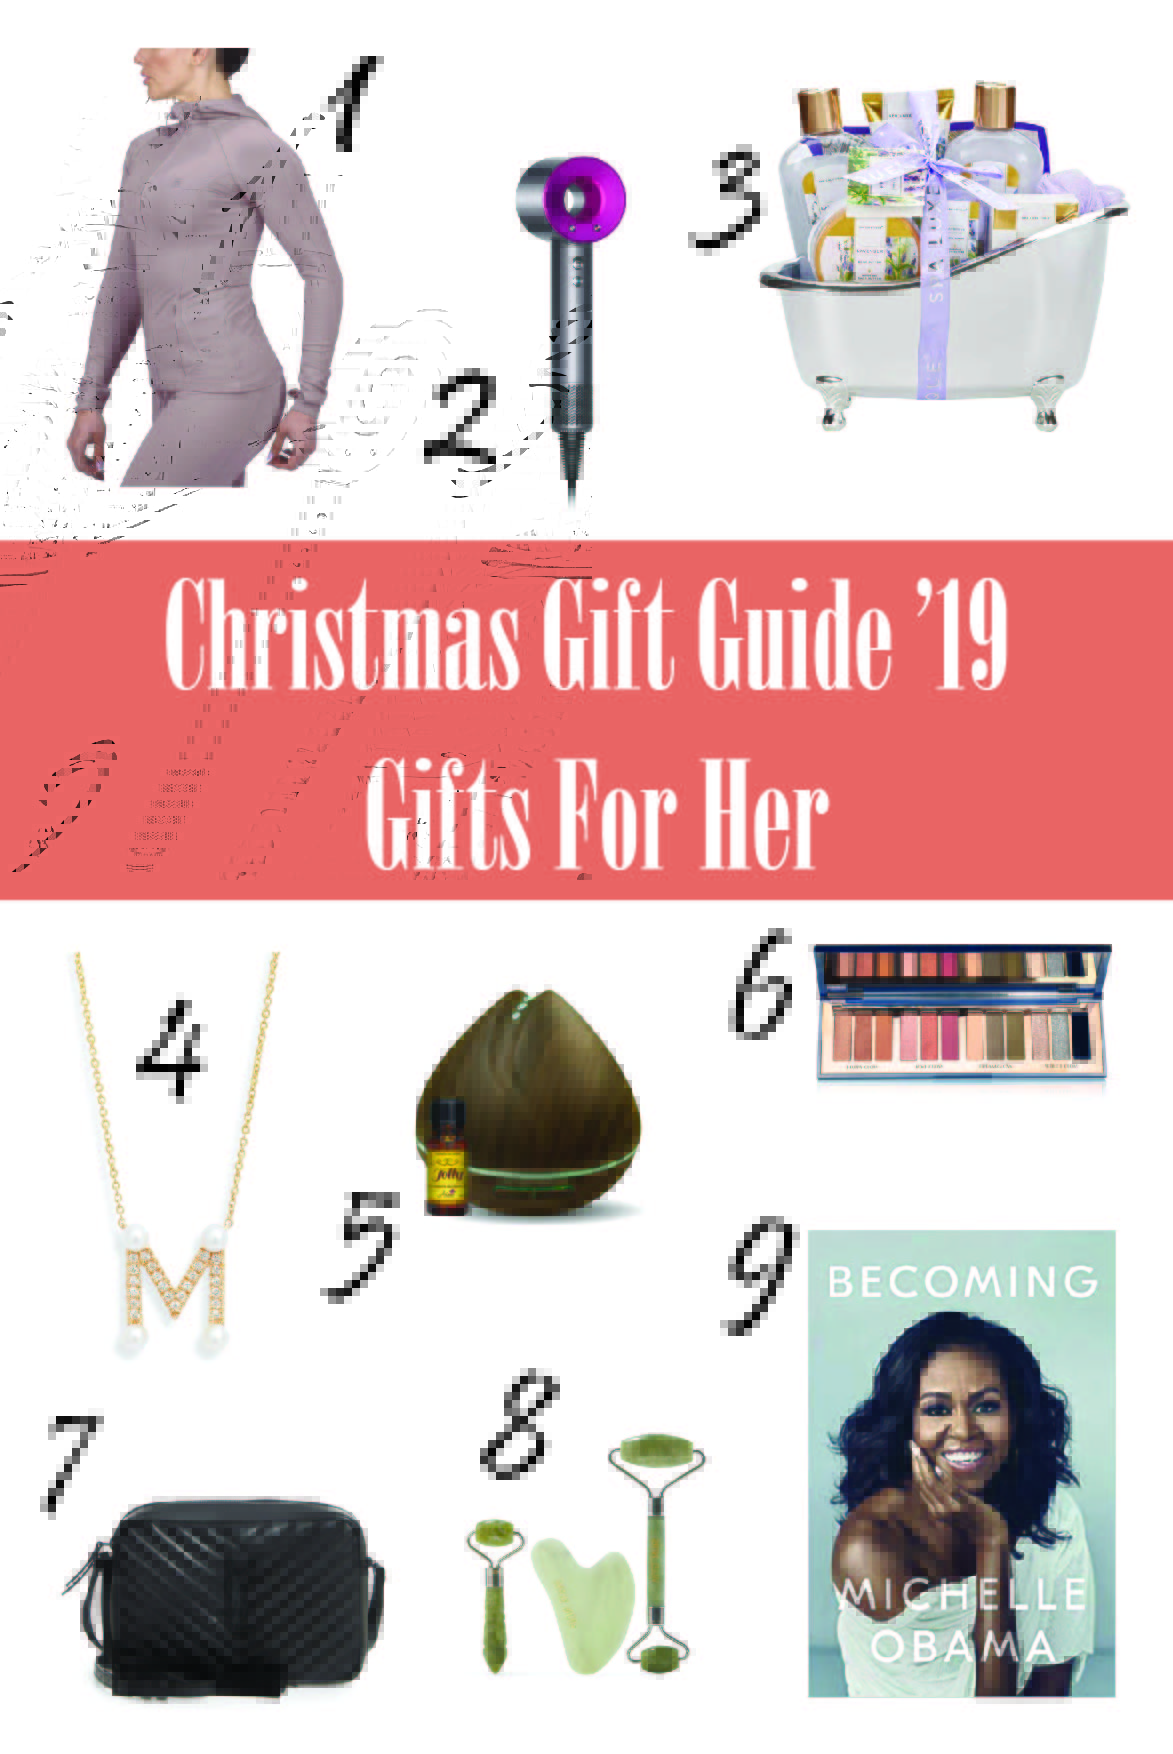 Christmas Gift Guide '19 Gifts For Her